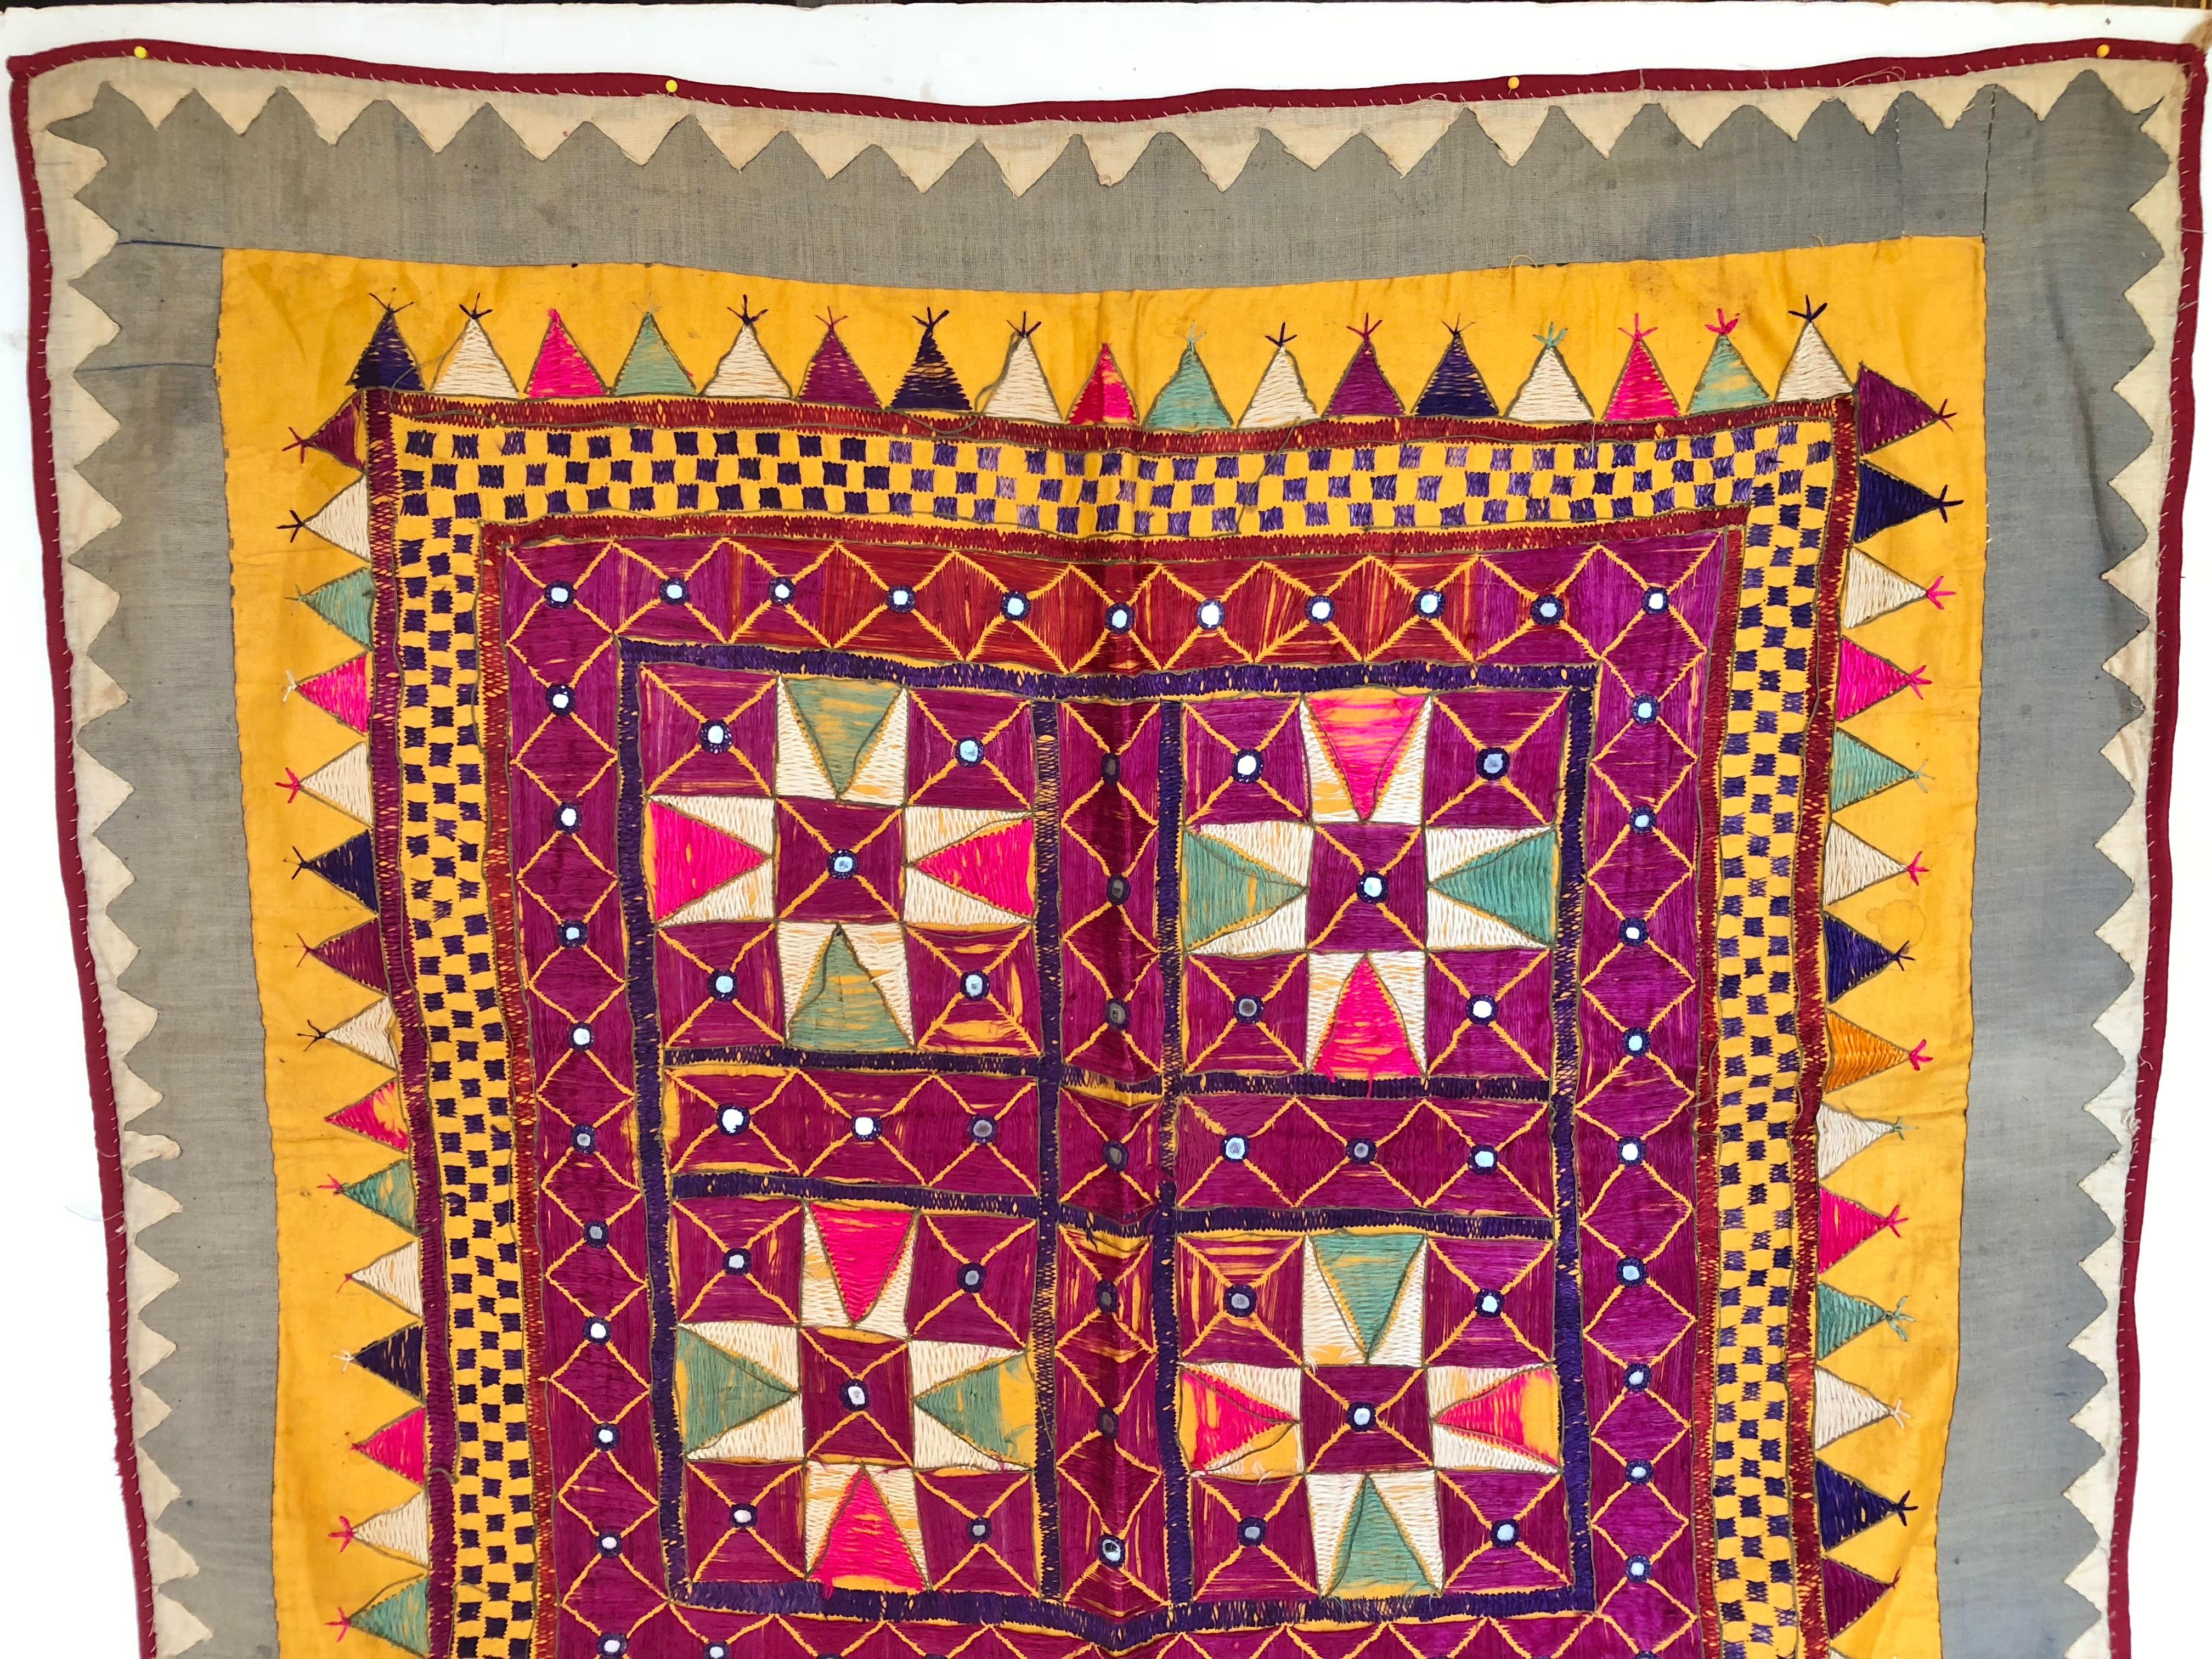 Hand-Woven Vintage Tribal Banjara Embroidered Chaakla with Mirrors, Wall Hanging, India For Sale